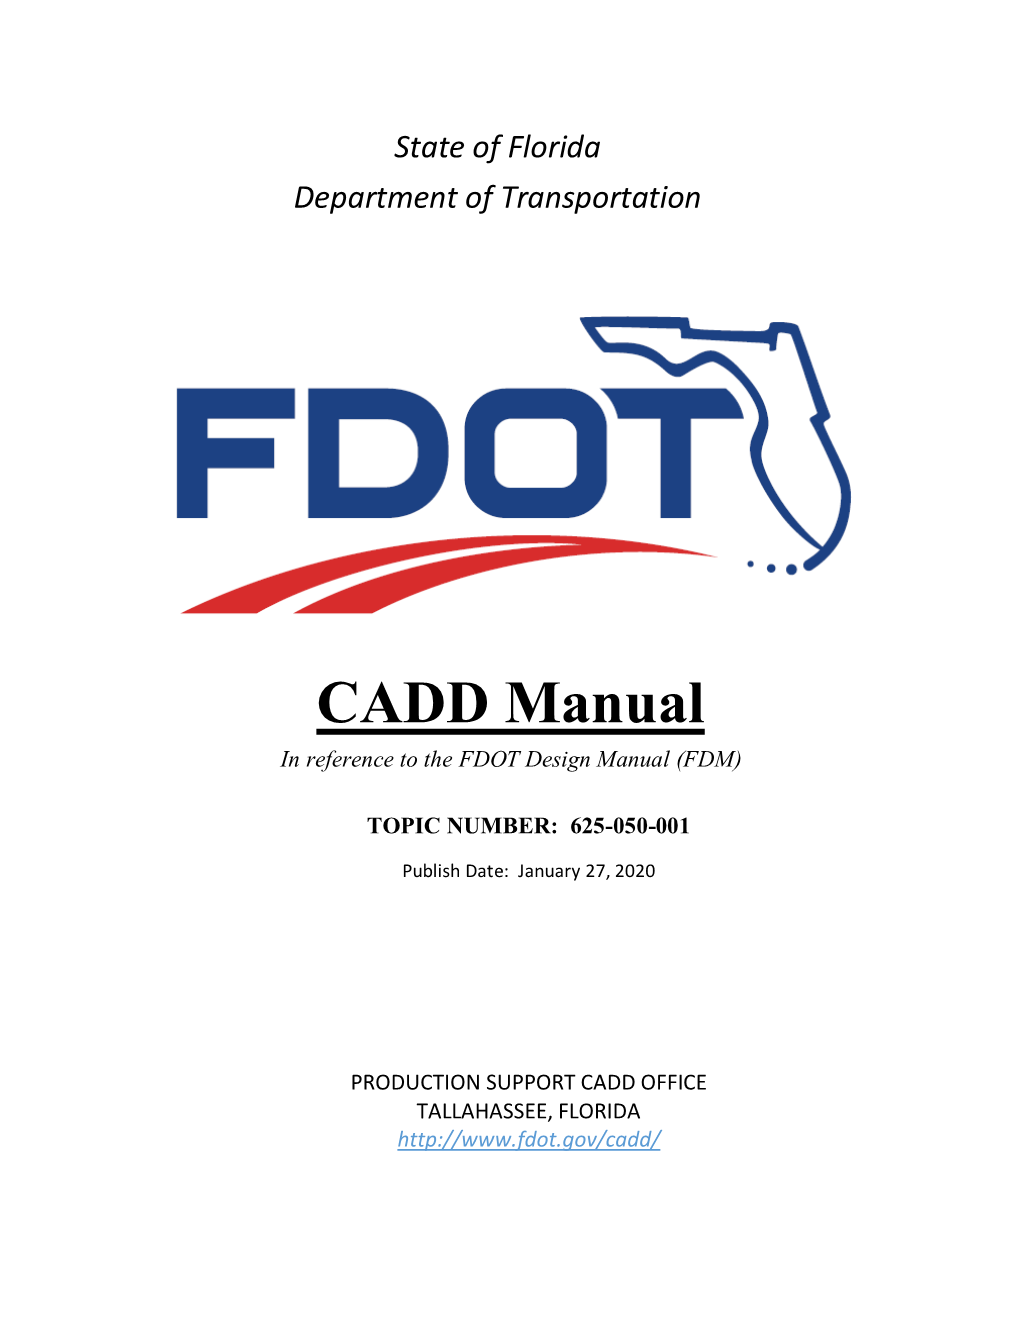 CADD Manual in Reference to the FDOT Design Manual (FDM) DocsLib